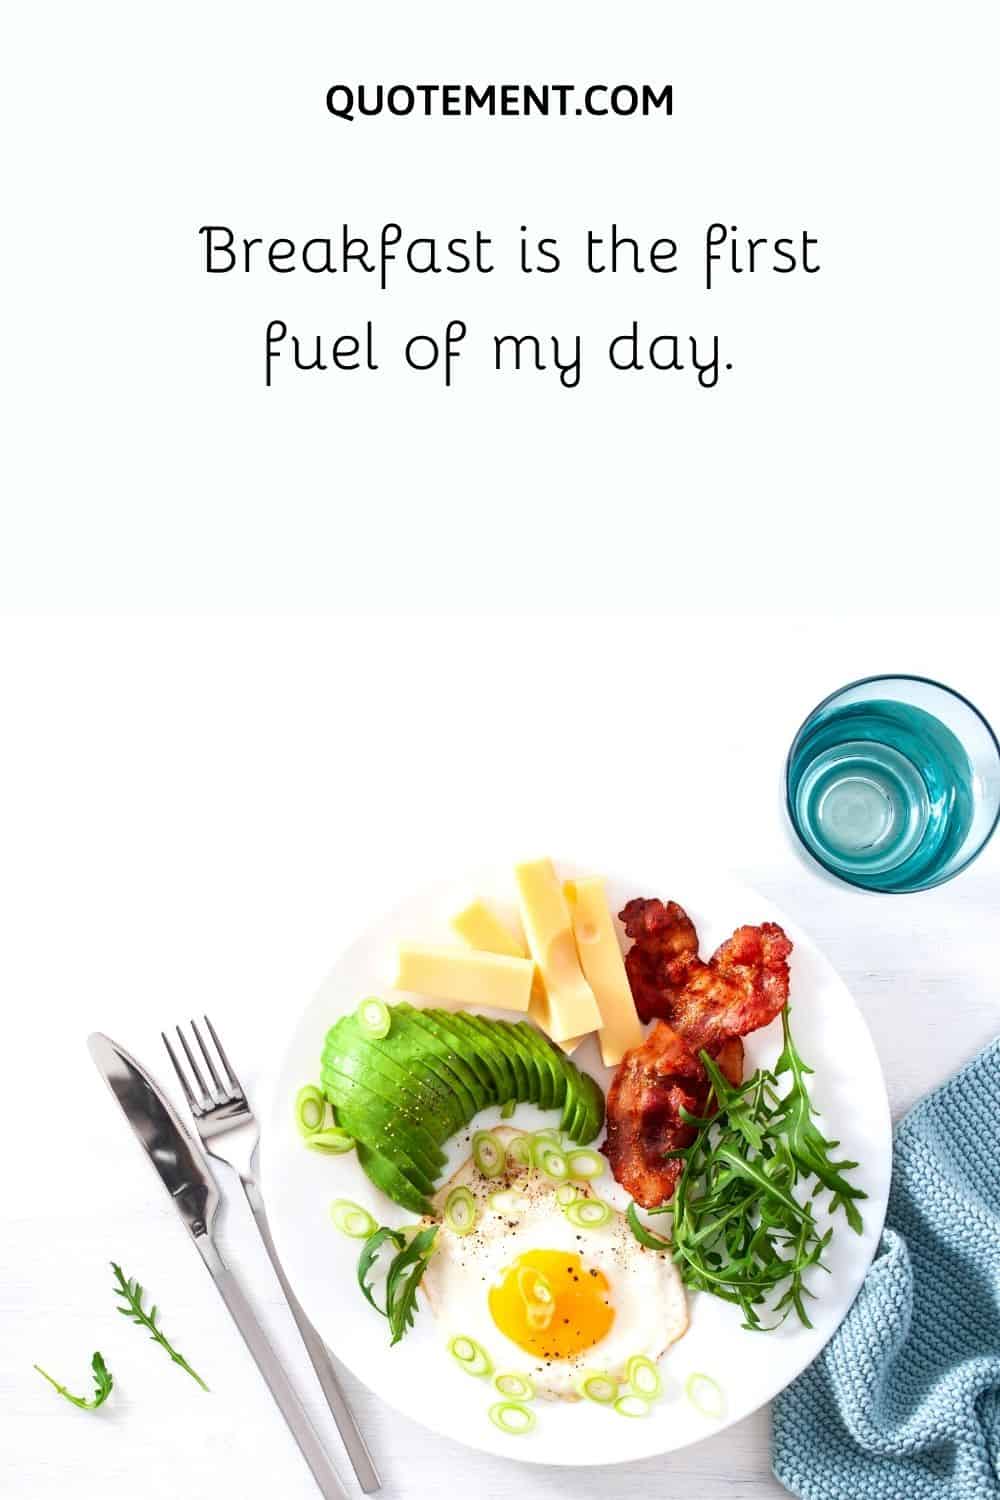 Breakfast is the first fuel of my day.